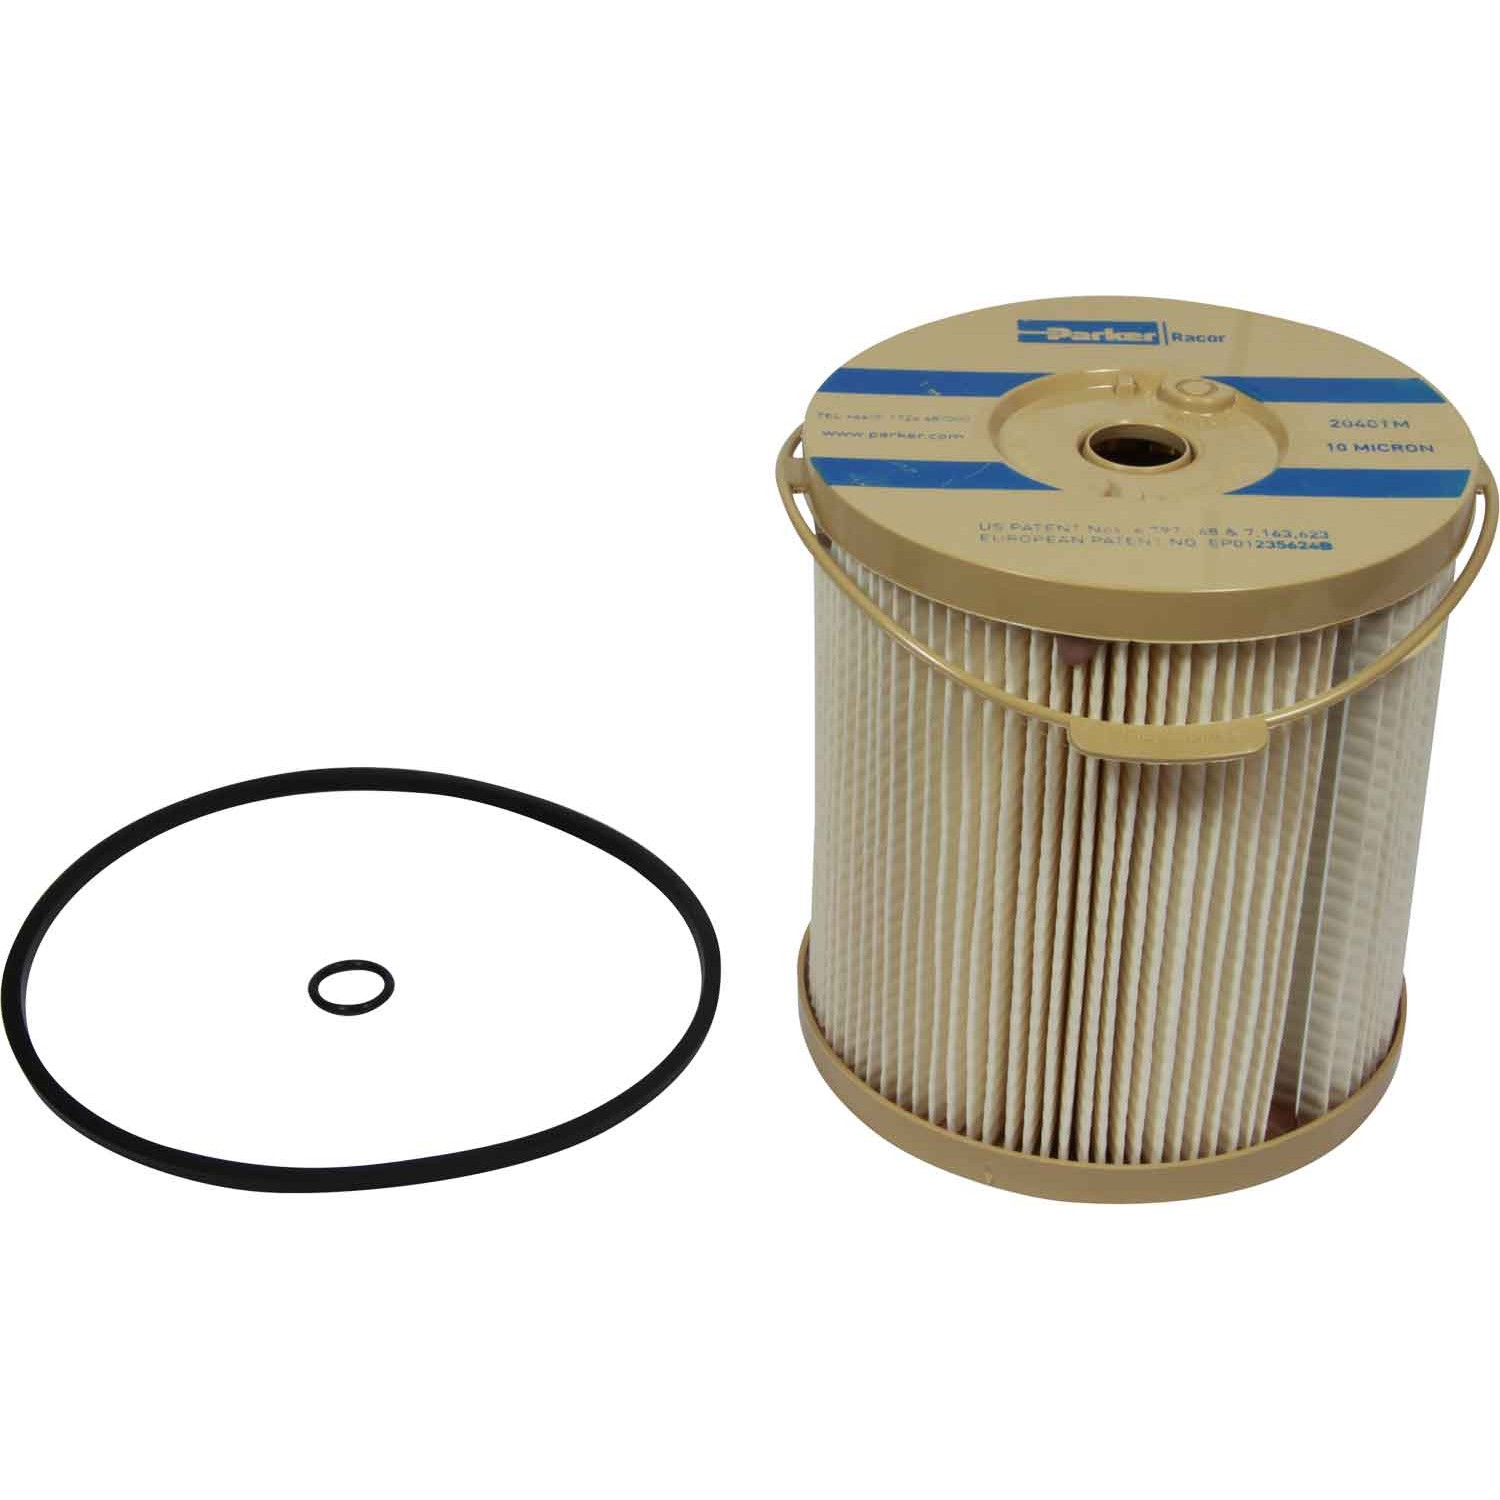 Racor 2040TM-OR Type 900 10 Micron Fuel Filter Element Replaces Volvo 3825027 